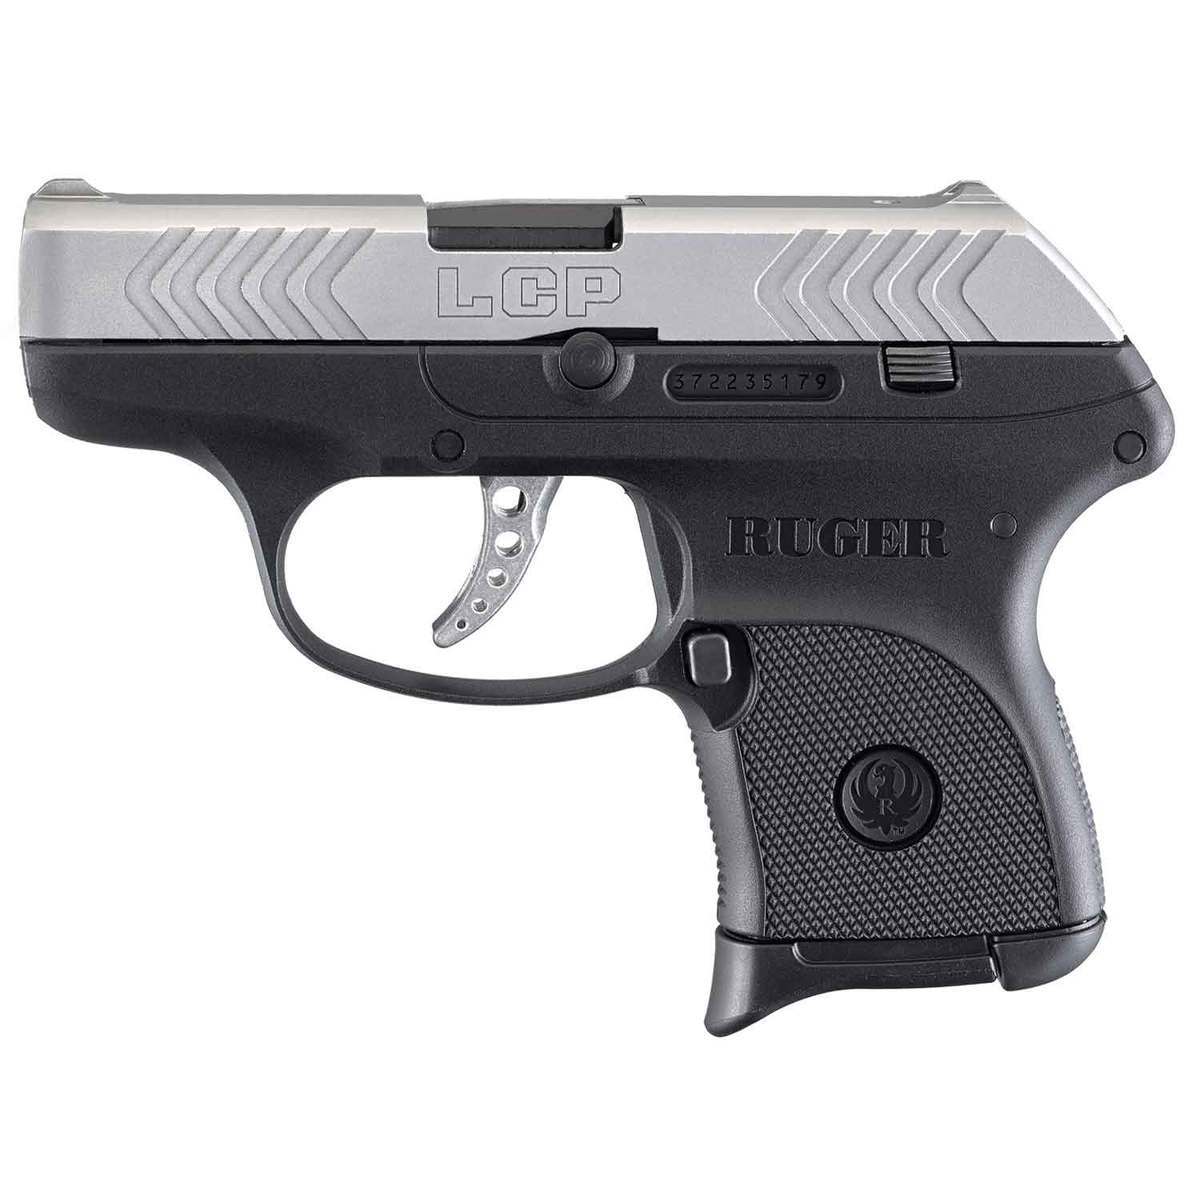 Ruger Lcp 380 Auto Acp 275in Matte Stainless Pistol 61 Rounds Black Sportsmans Warehouse 7972